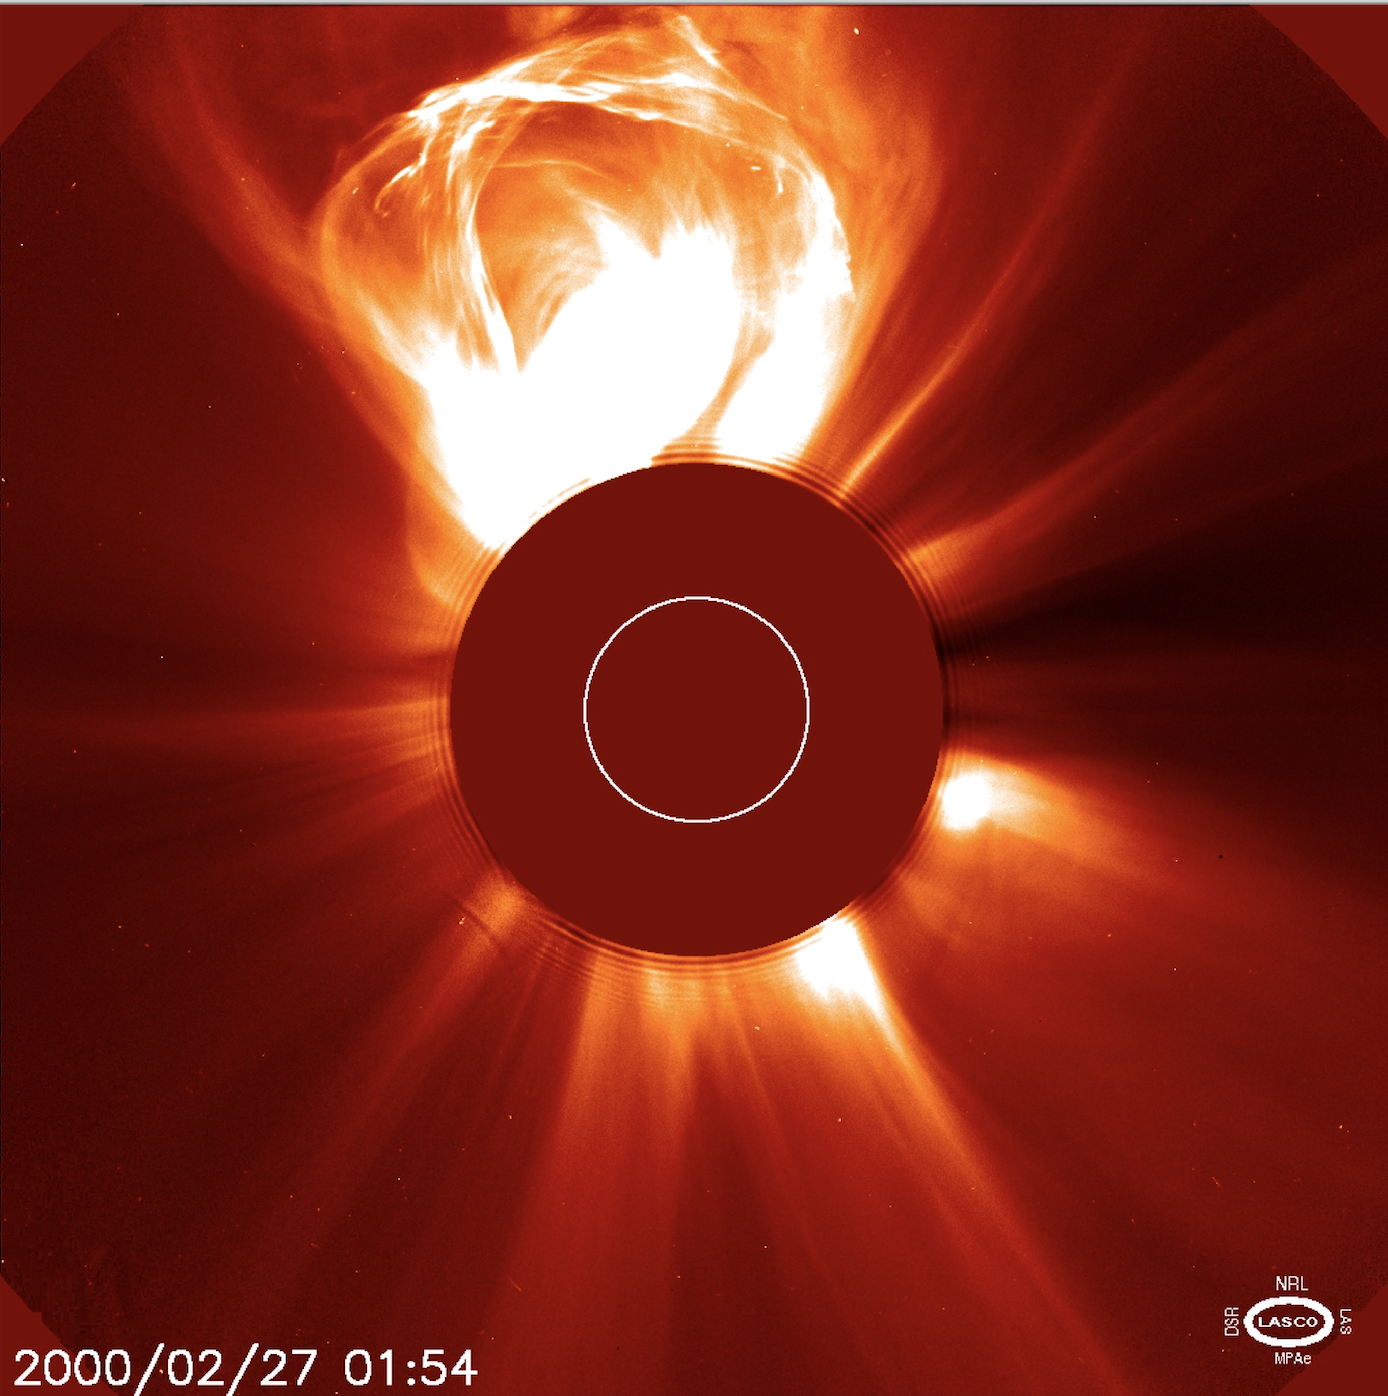 n this image, taken by the Solar and Heliospheric Observatory on Feb. 27, 2000, a CME is seen erupting from the Sun